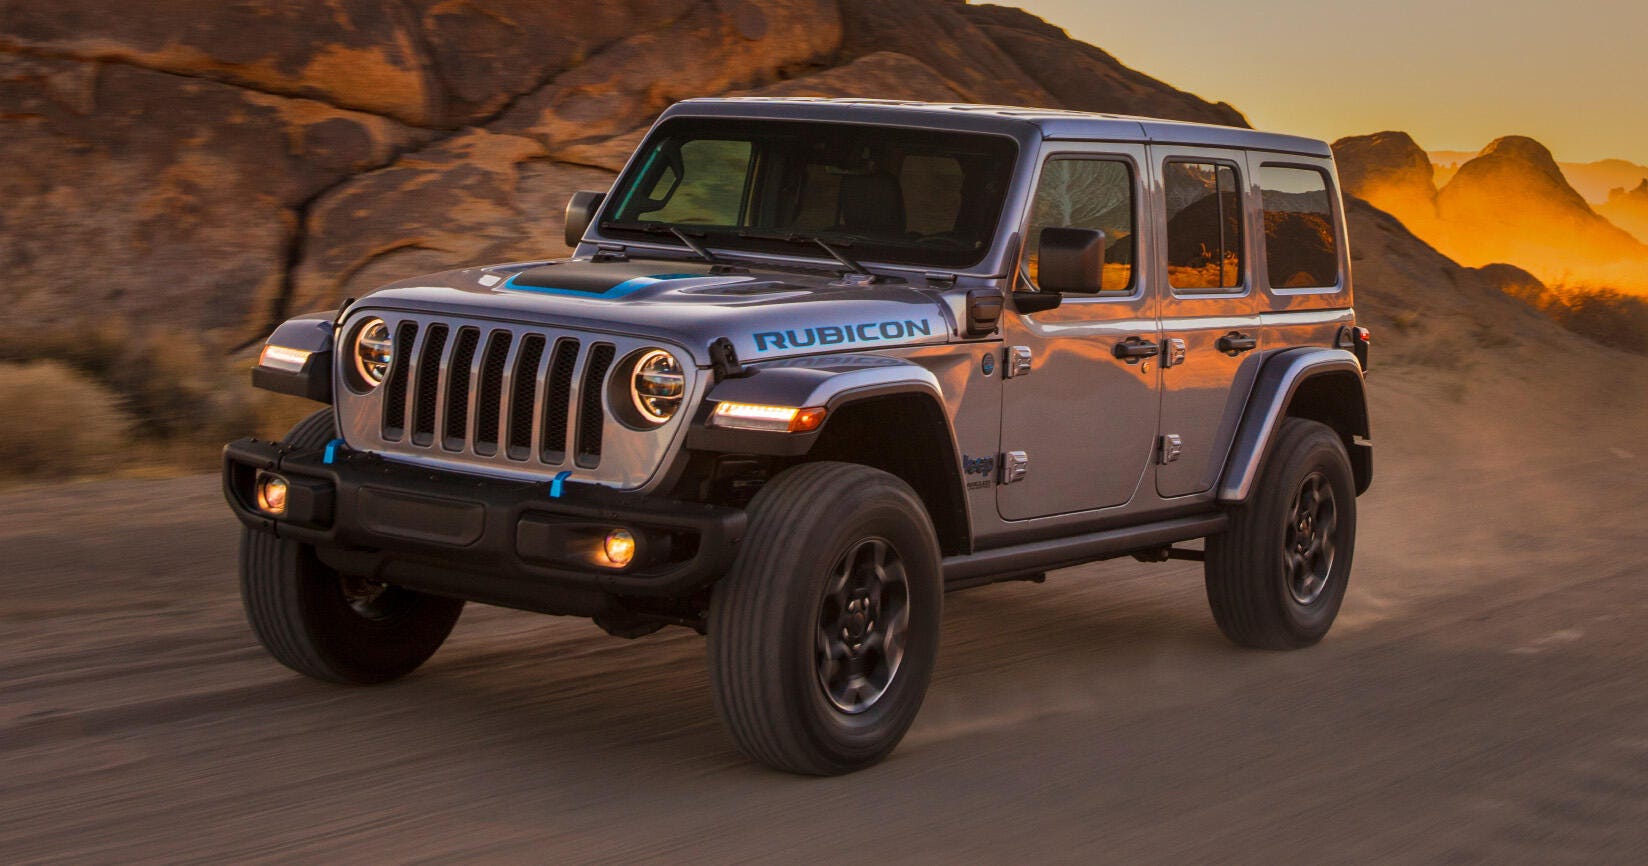 2021 Jeep Wrangler 4xe plug-in hybrid has 25 miles of electric range - CNET